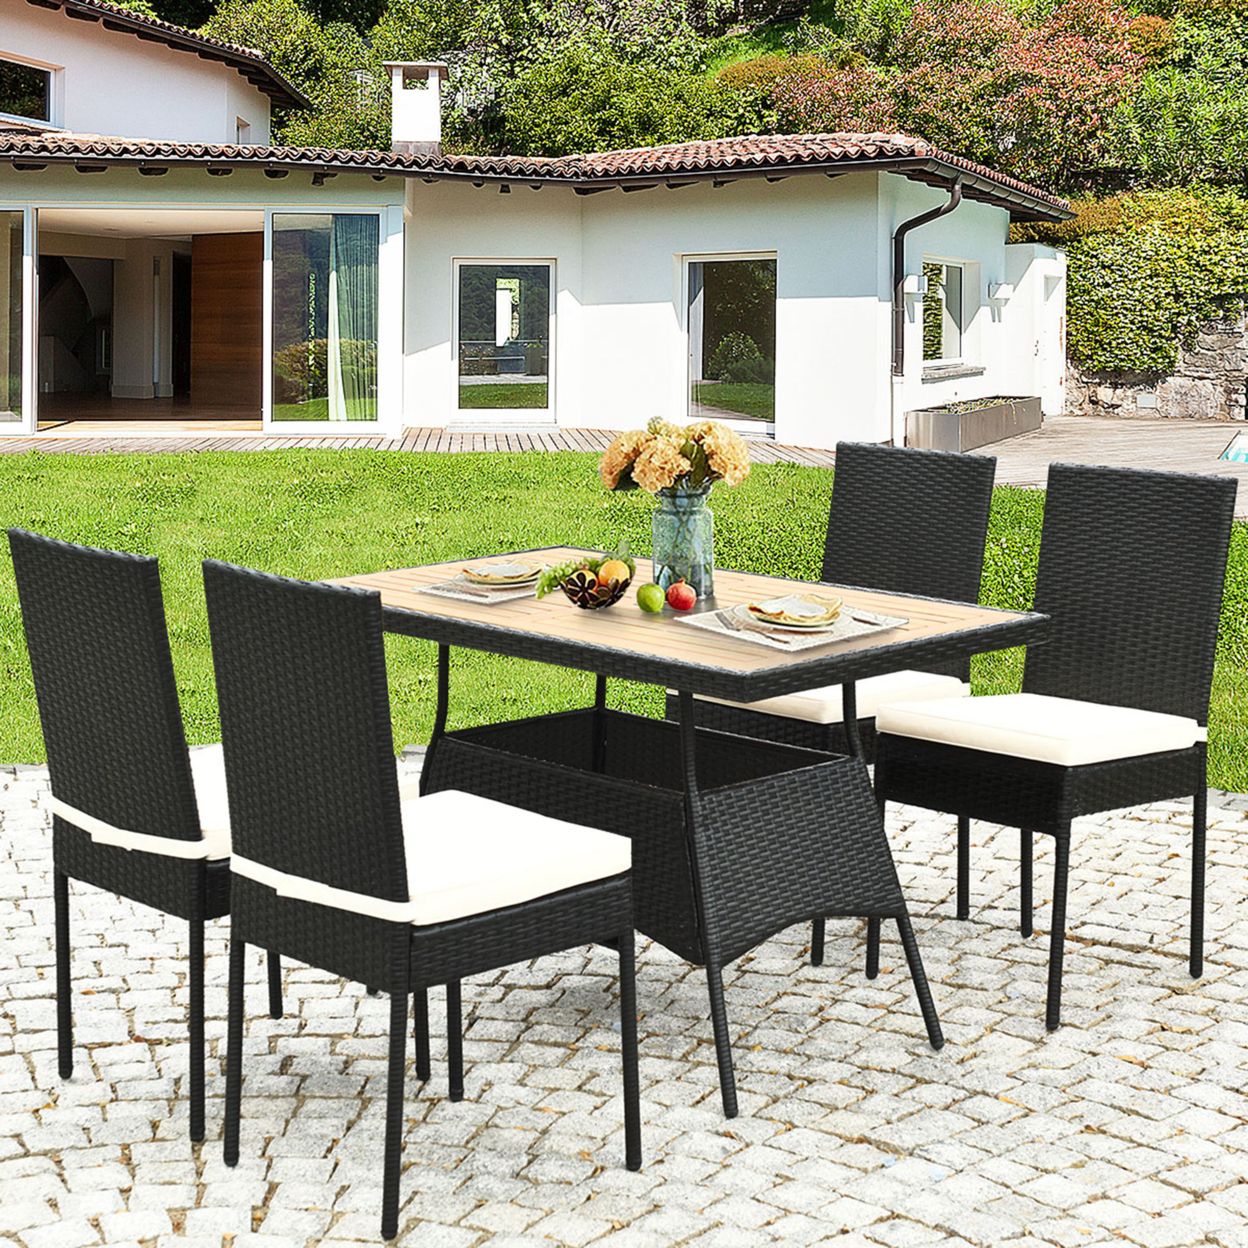 5PCS Rattan Patio Dining Set Outdoor W/ Cushion Wooden Tabletop 4 Chairs